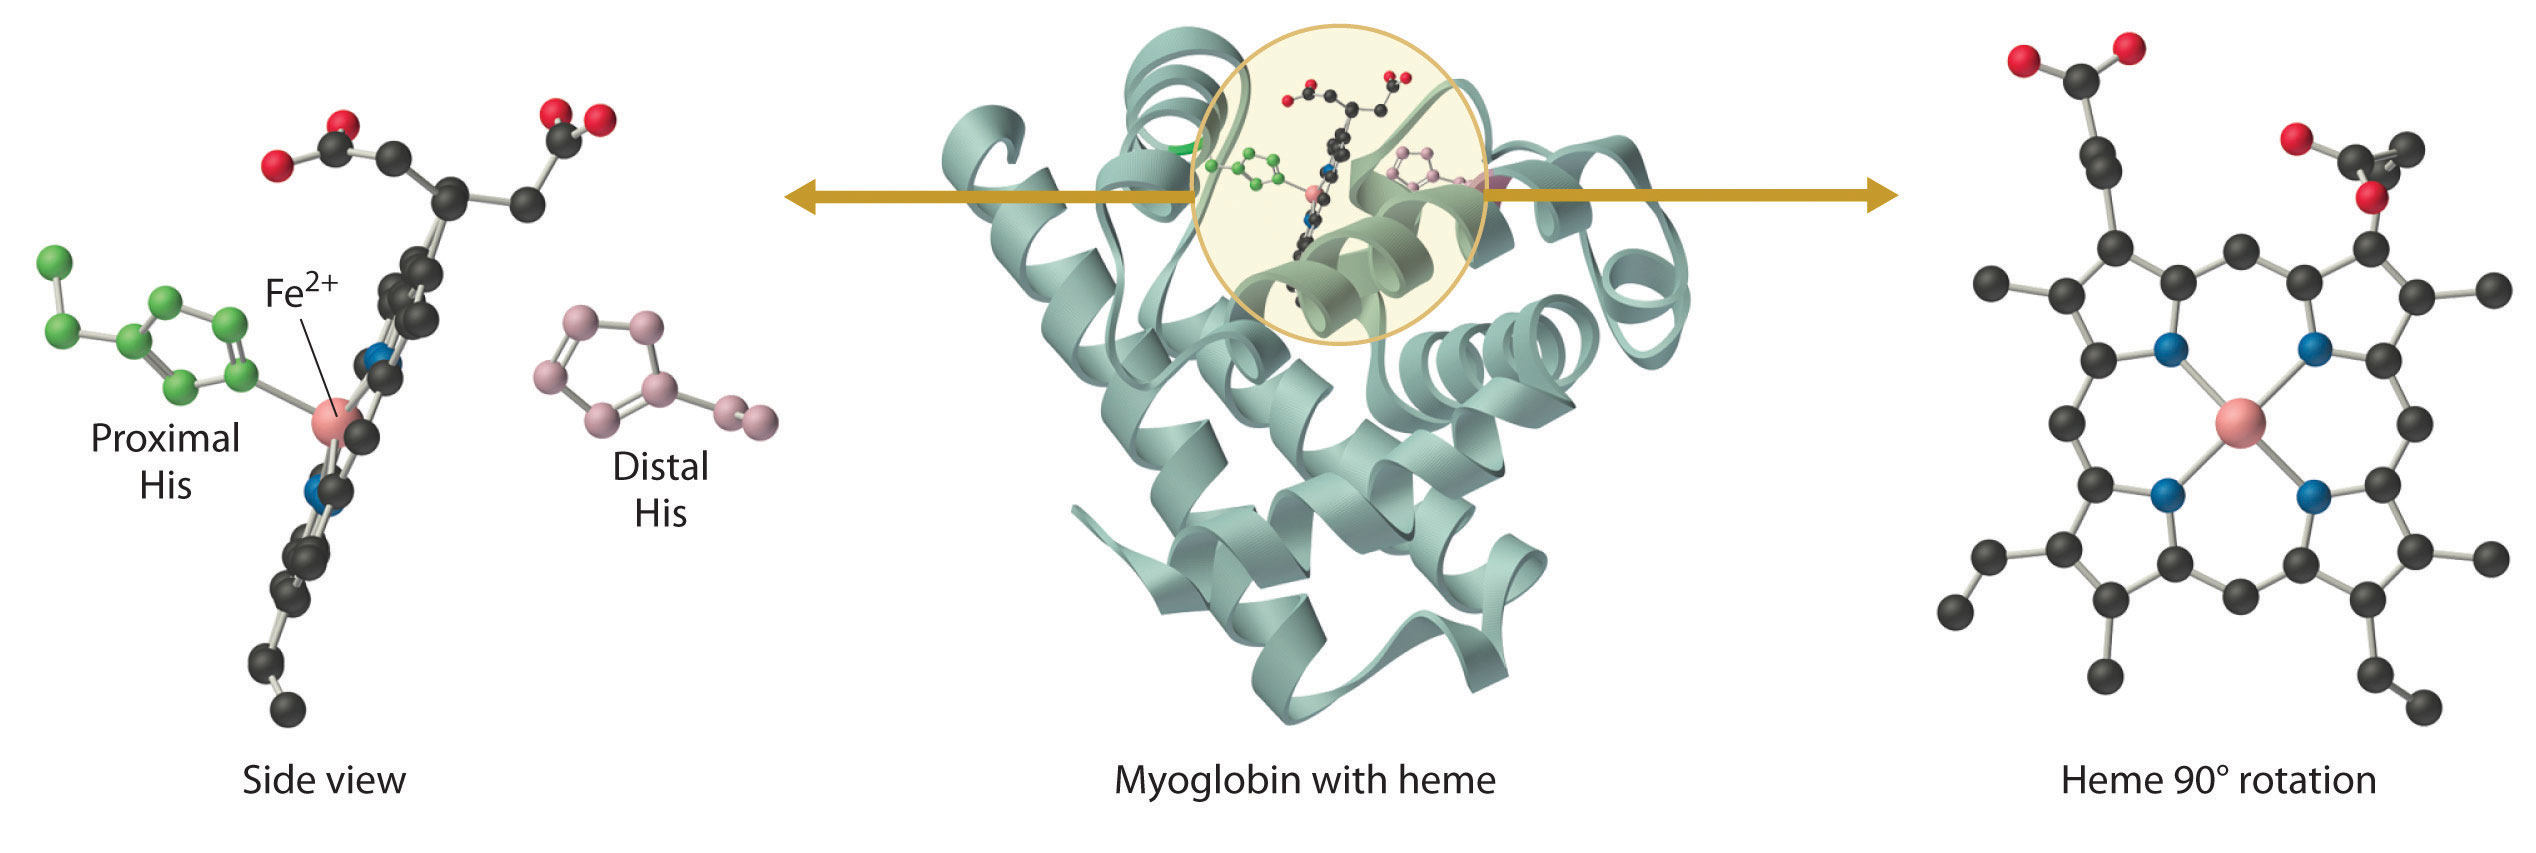 Side view of deoxymyoglobin is shown with the bonds of F e 2 positive to proximal histidine clearly visible. The middle diagram shows the three dimensional structure of myoglobin with heme in the center. The final diagram shows a 90 degree rotation to give a planar view of heme.  